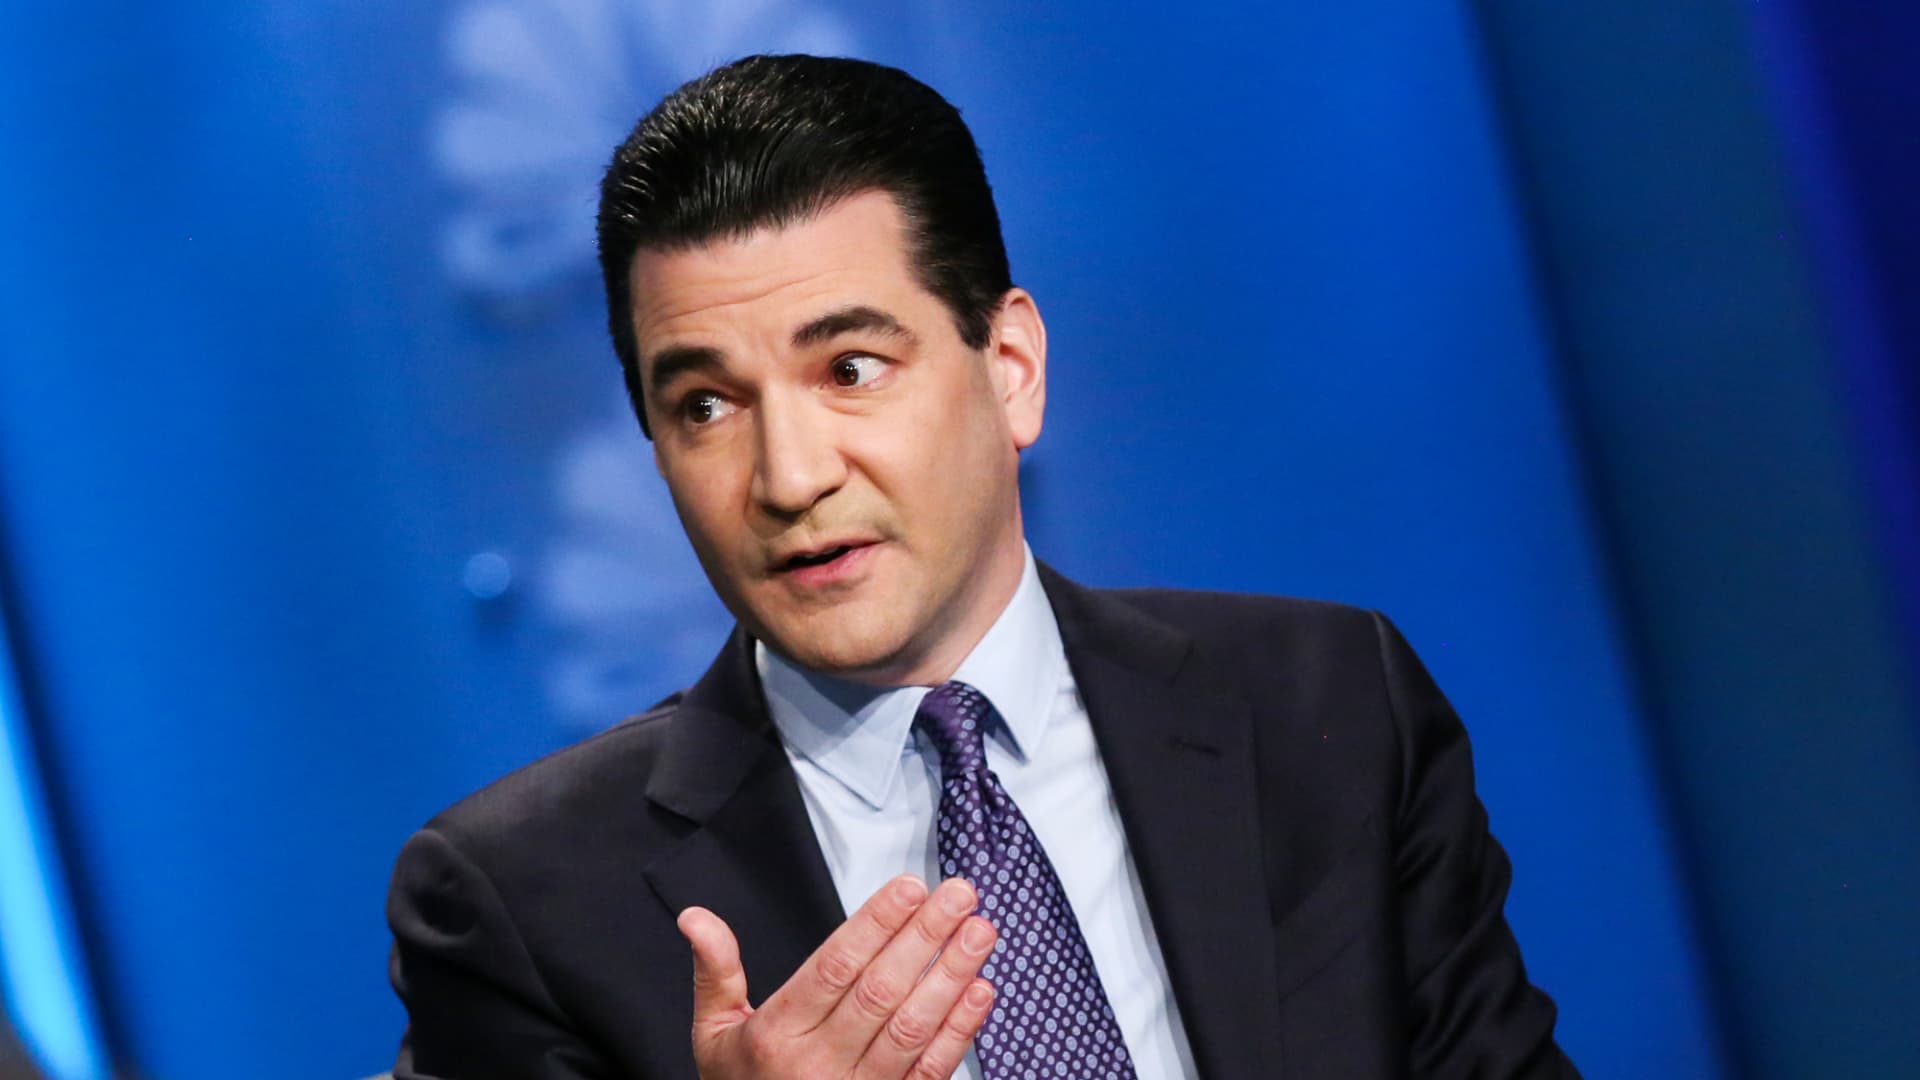 Covid-19 pandemic 'will be over by January one way or the other,' says former FDA chief Scott Gottlieb